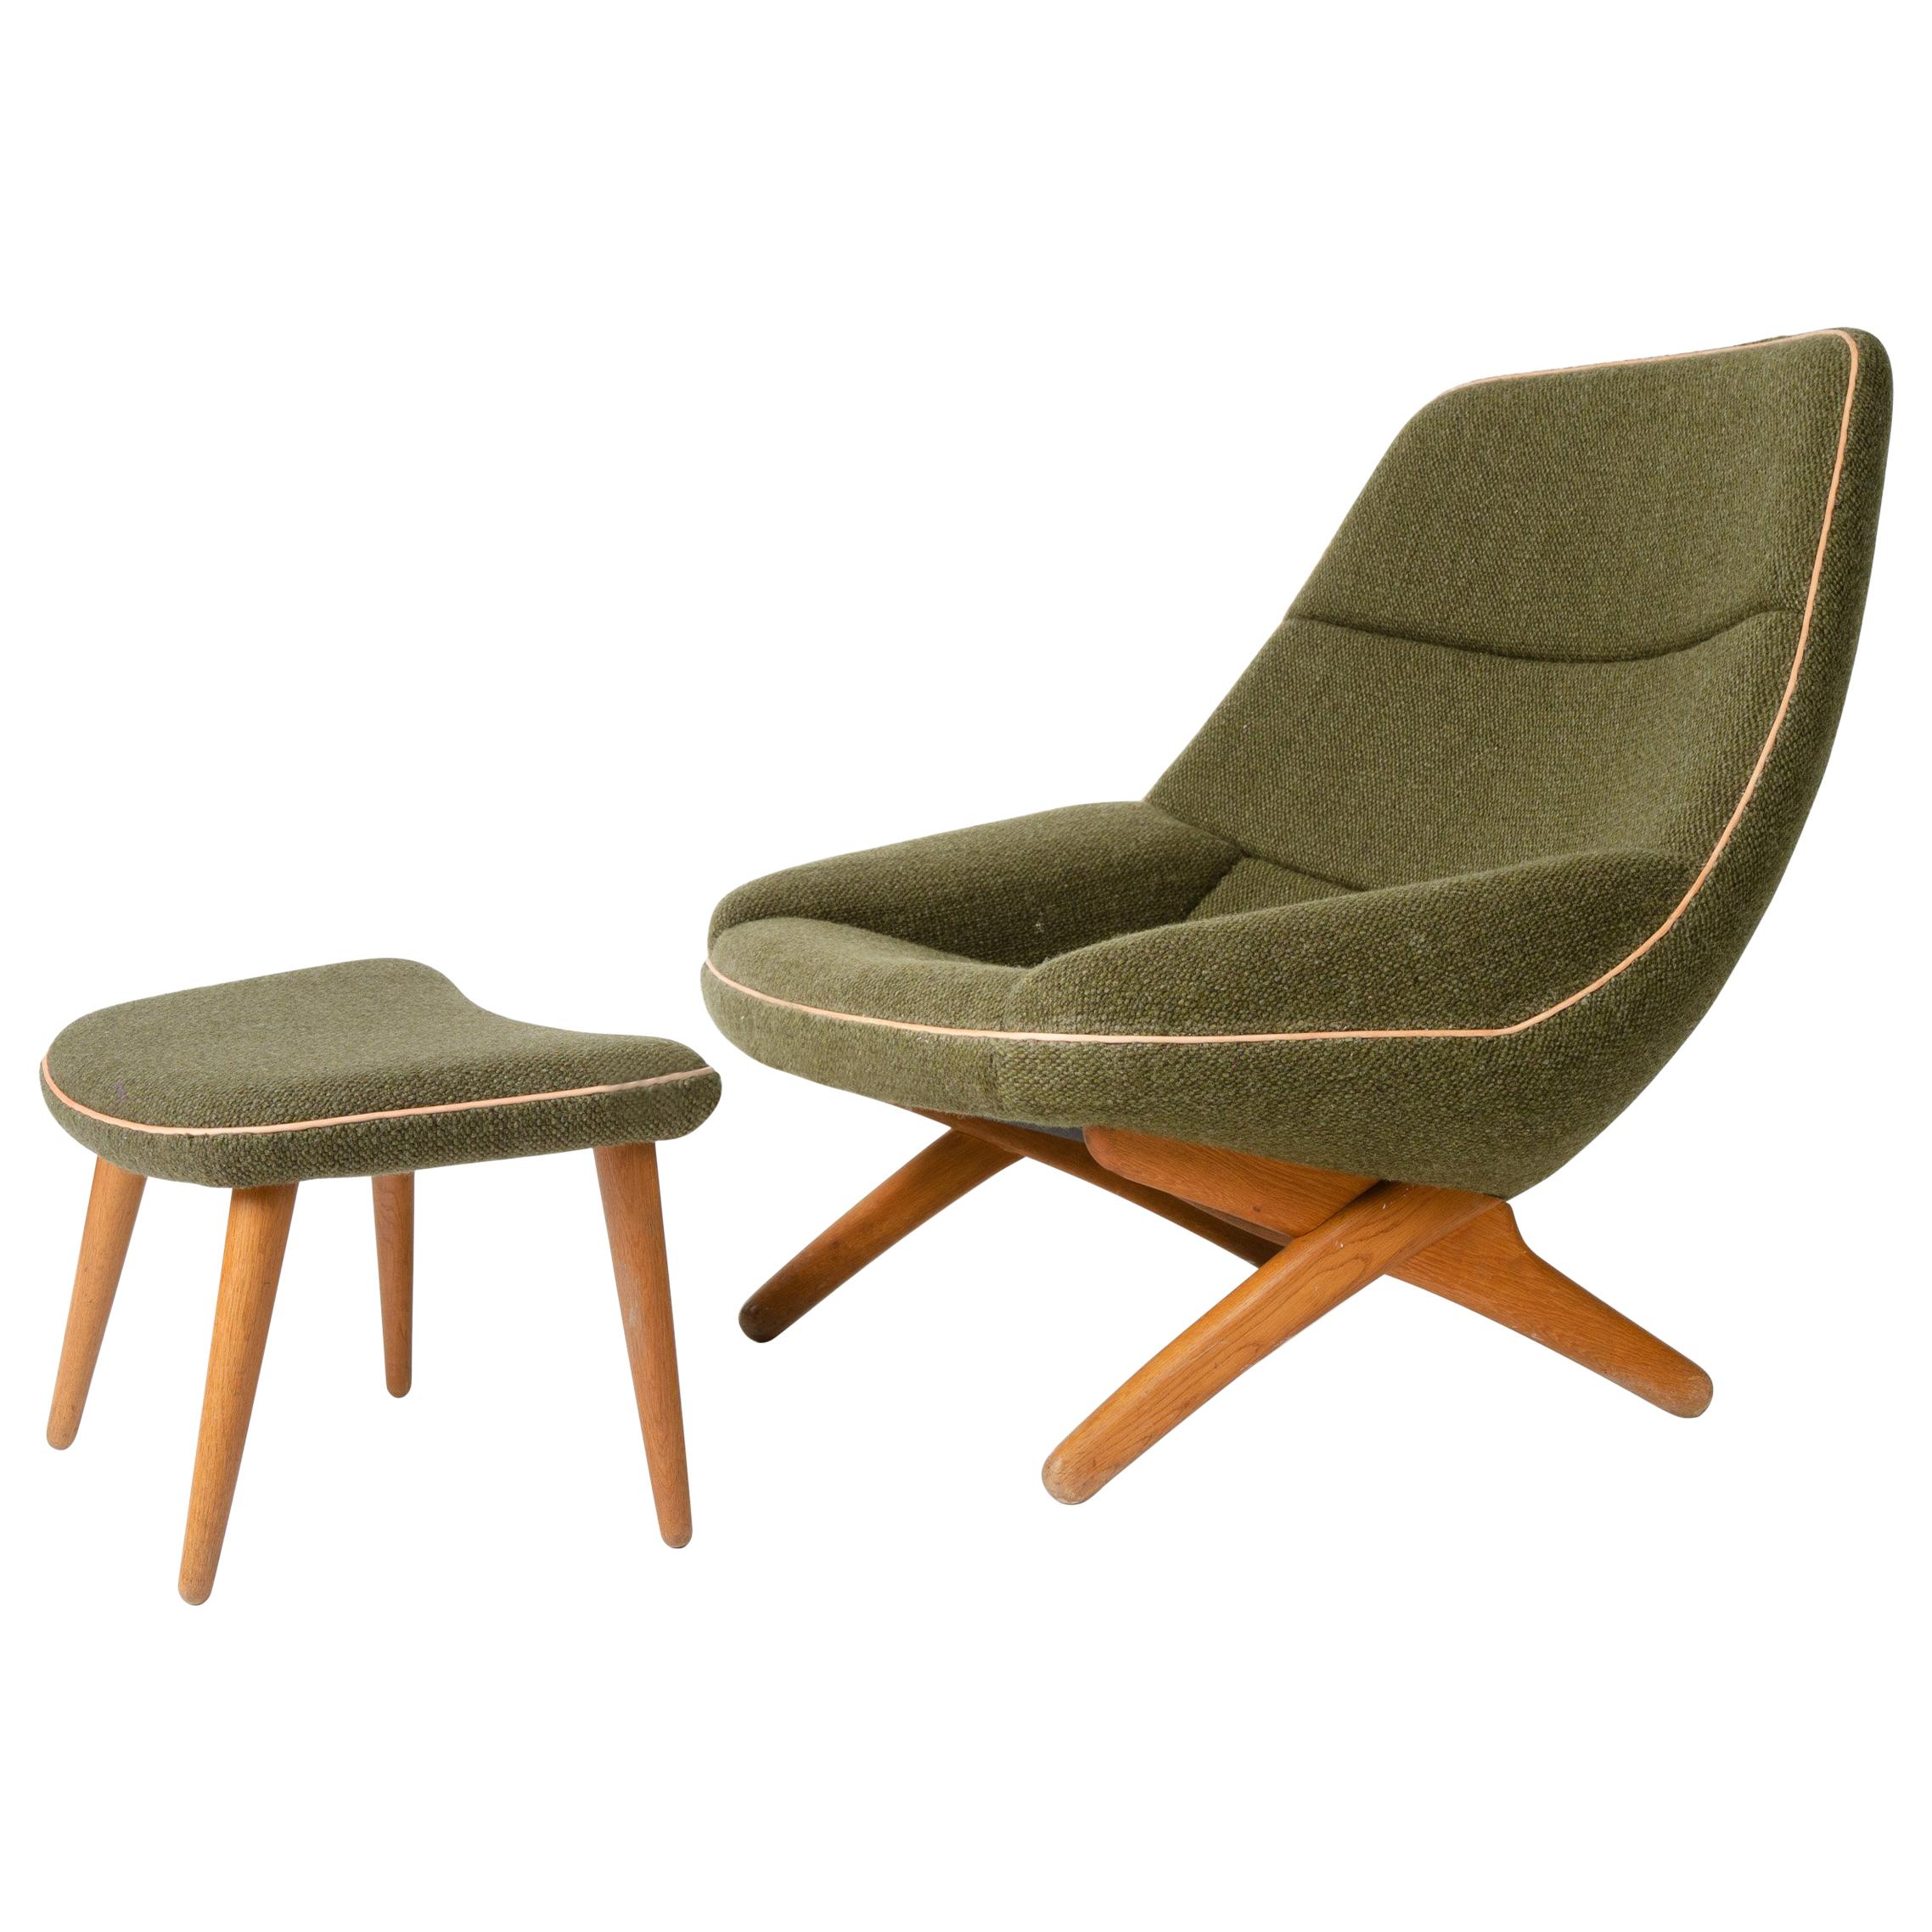 Sculptural Lounge Chair and Ottoman by Illum Wikkelso